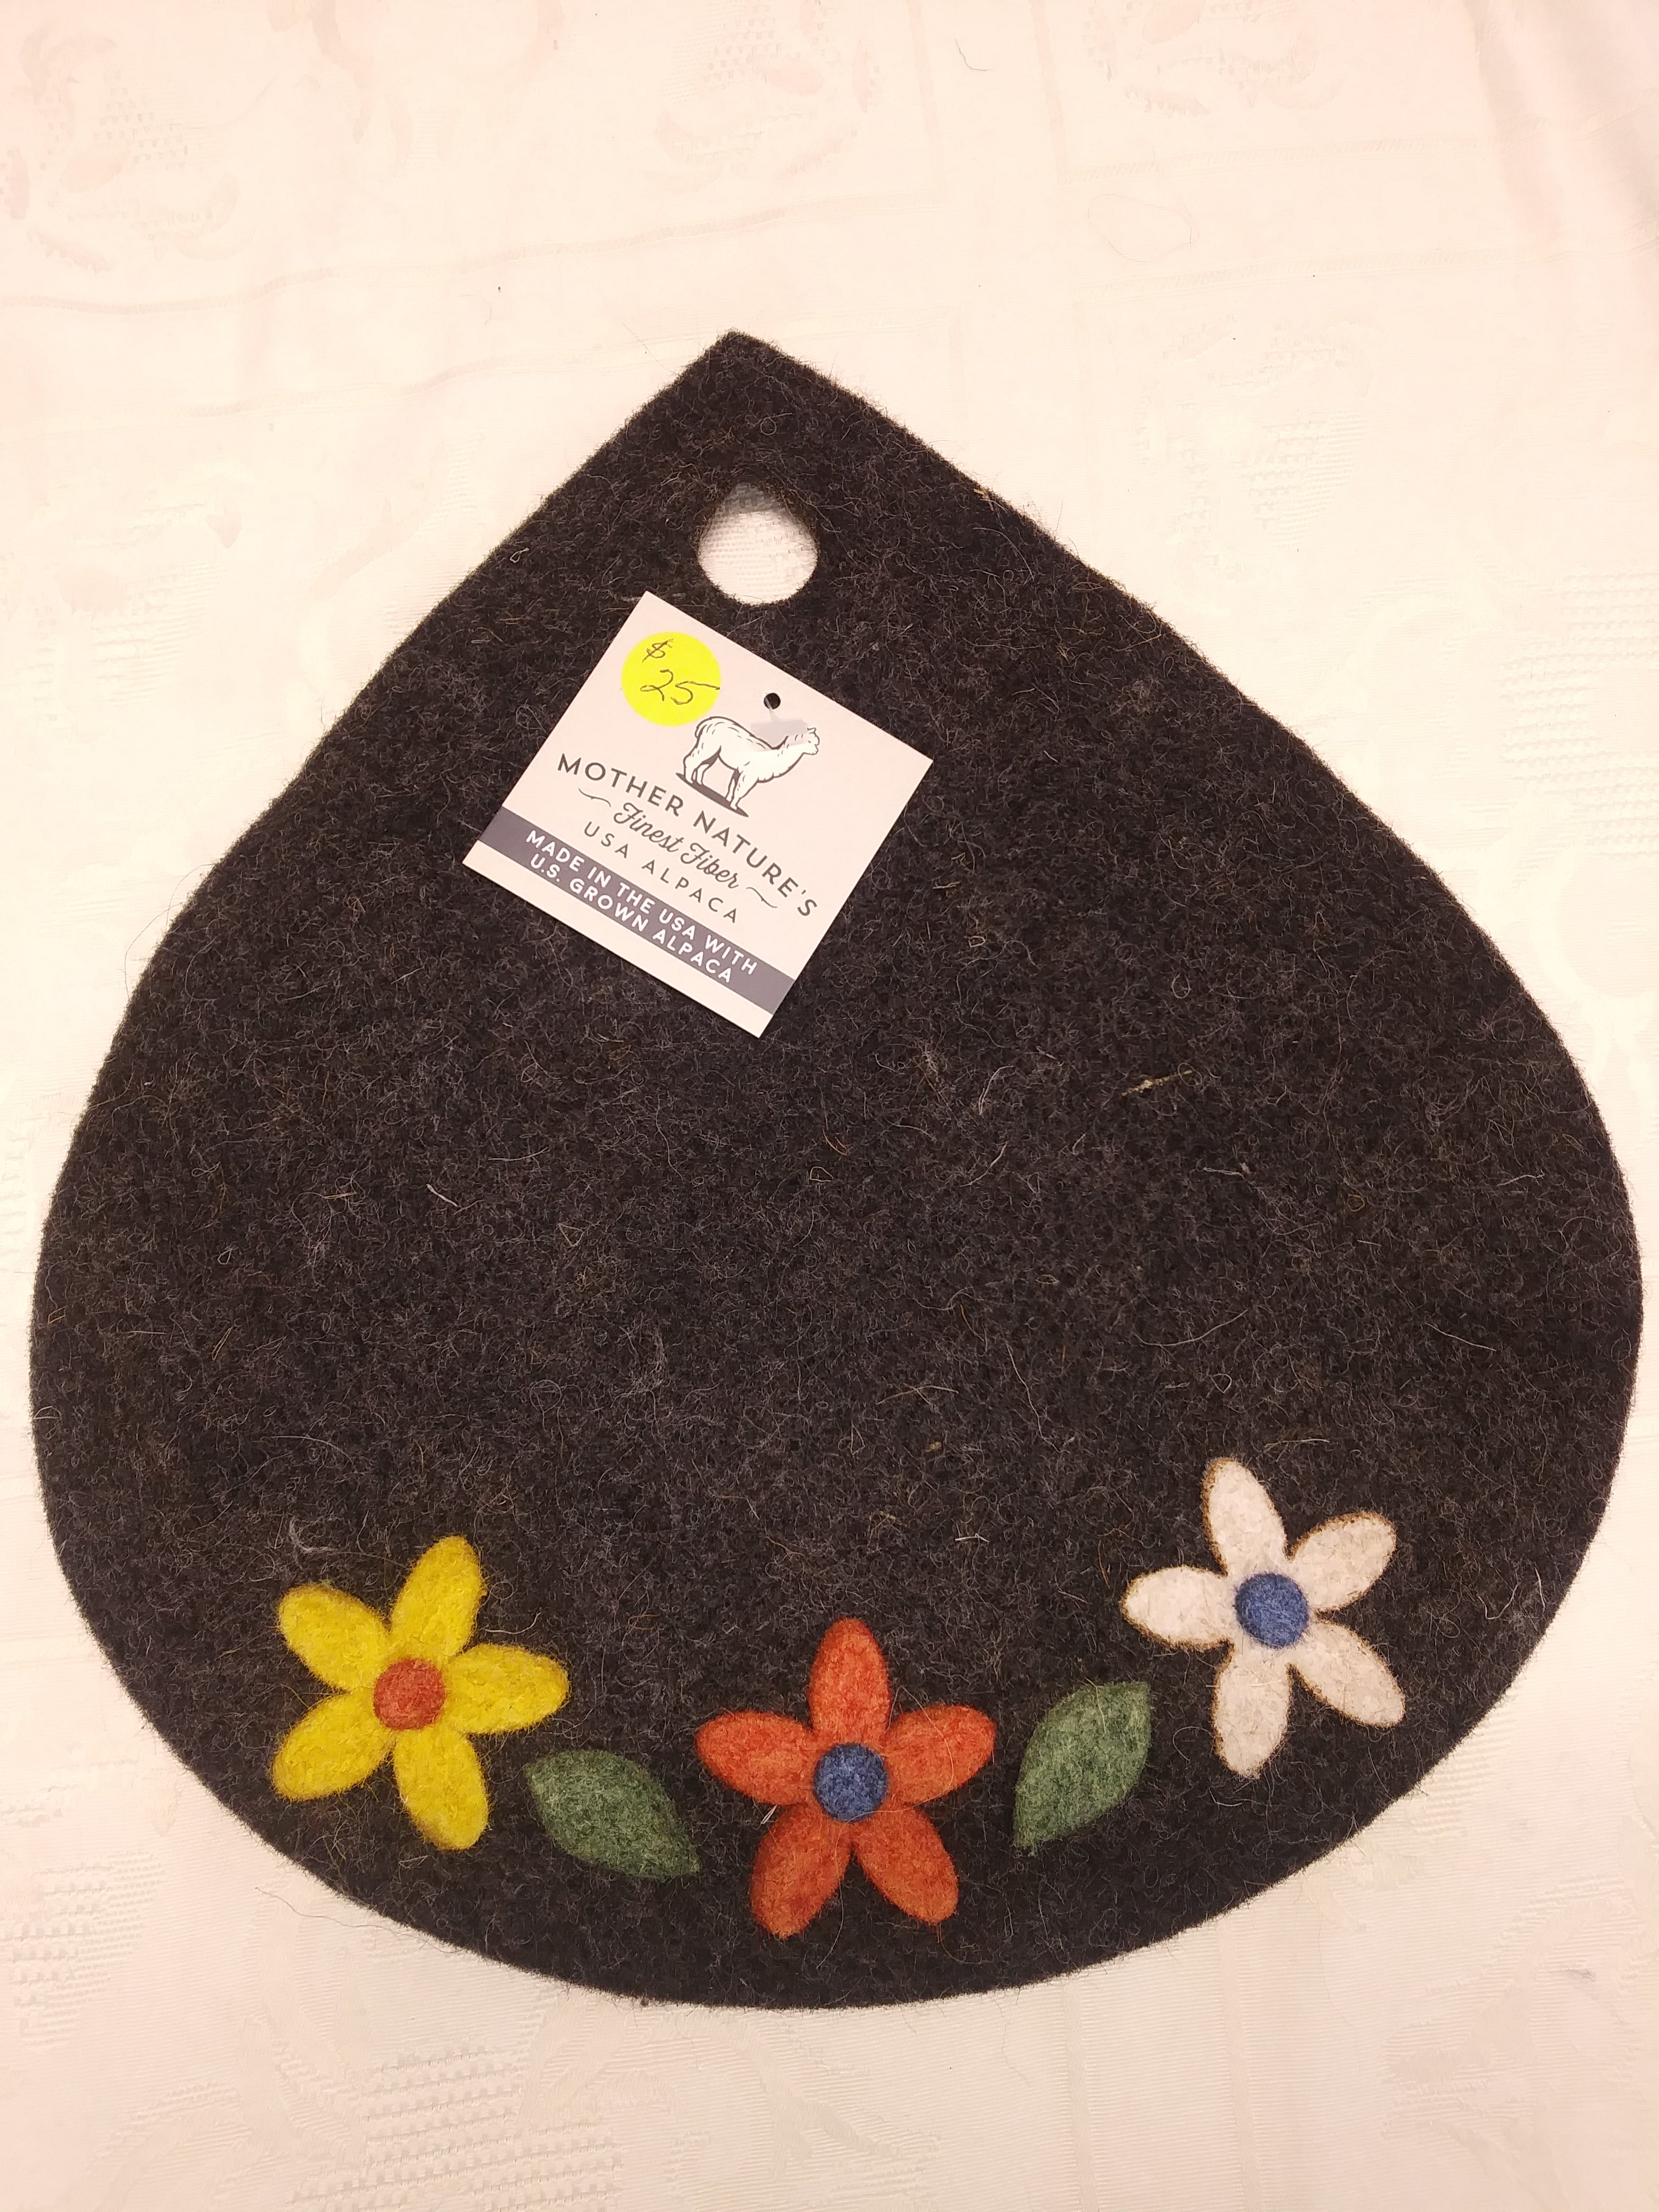 Decorated Alpaca Felted Trivet or Table Pad